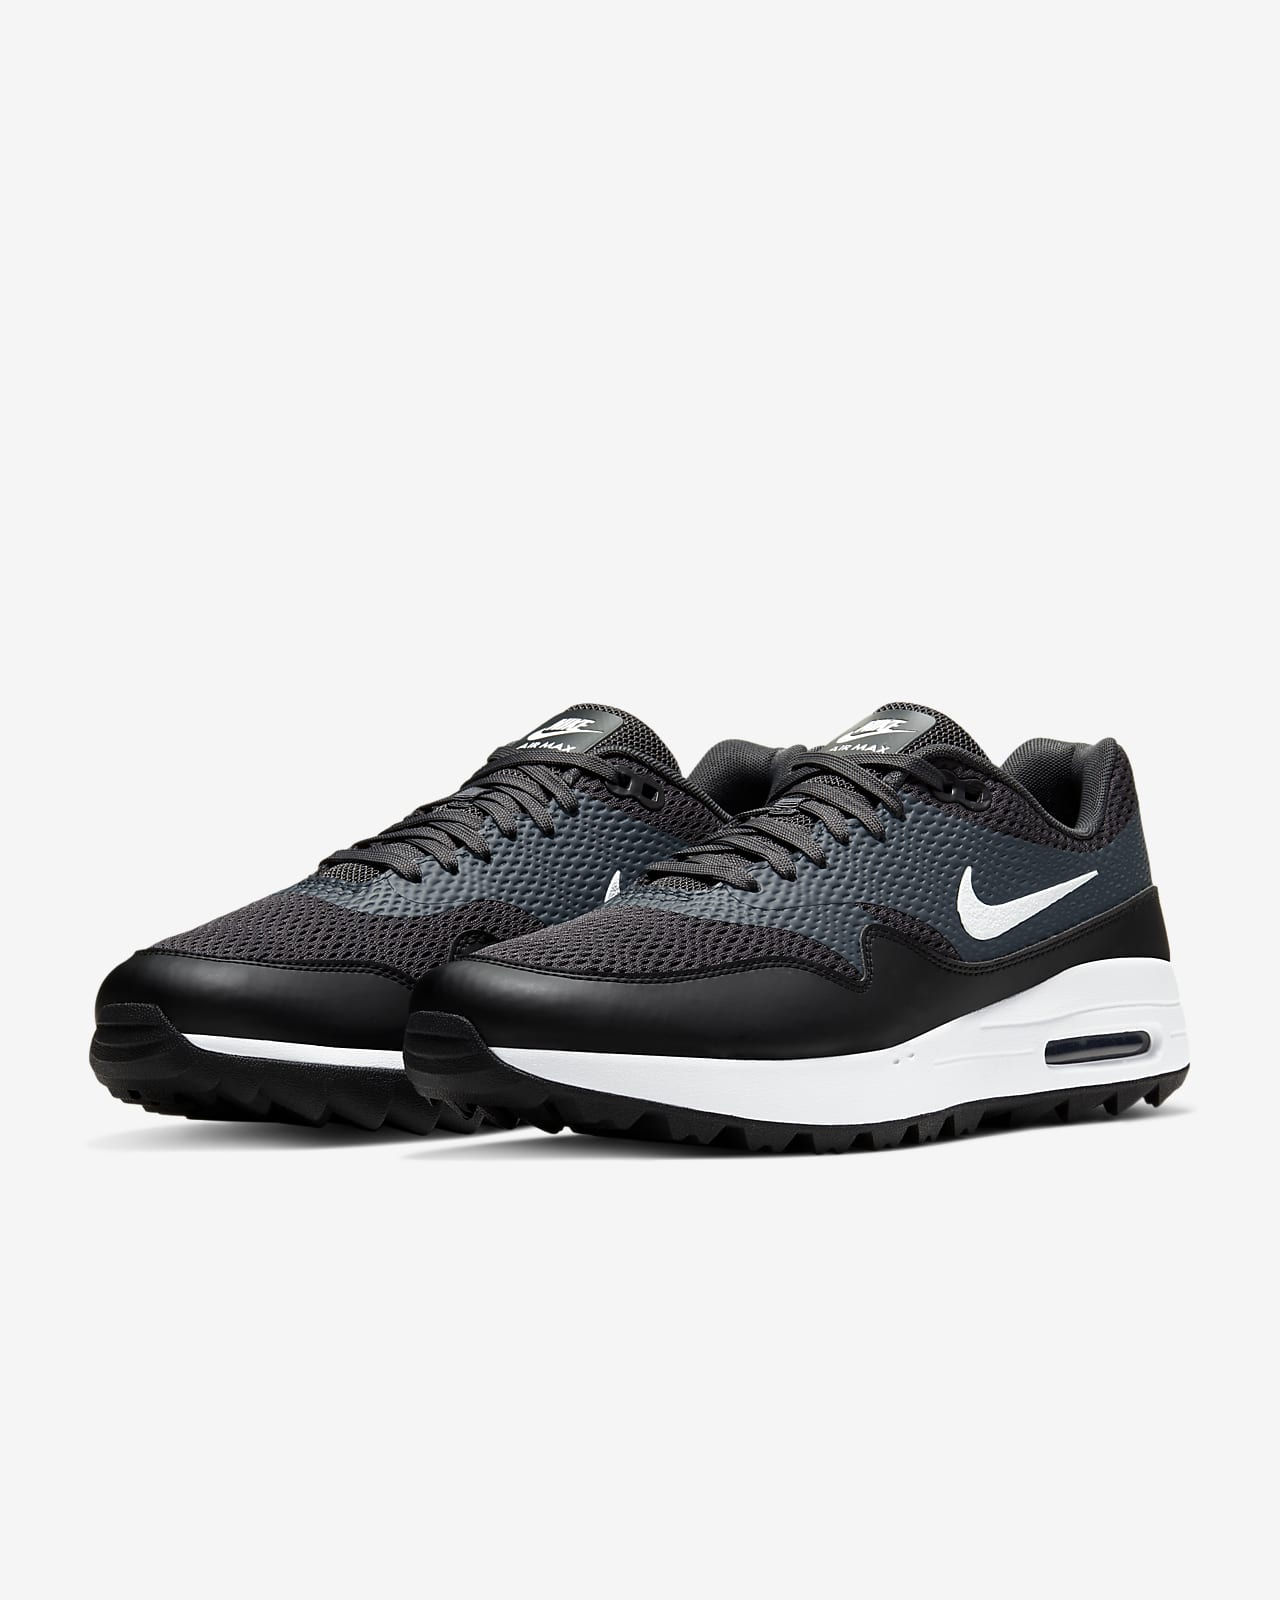 nike air max 1g golf shoes review